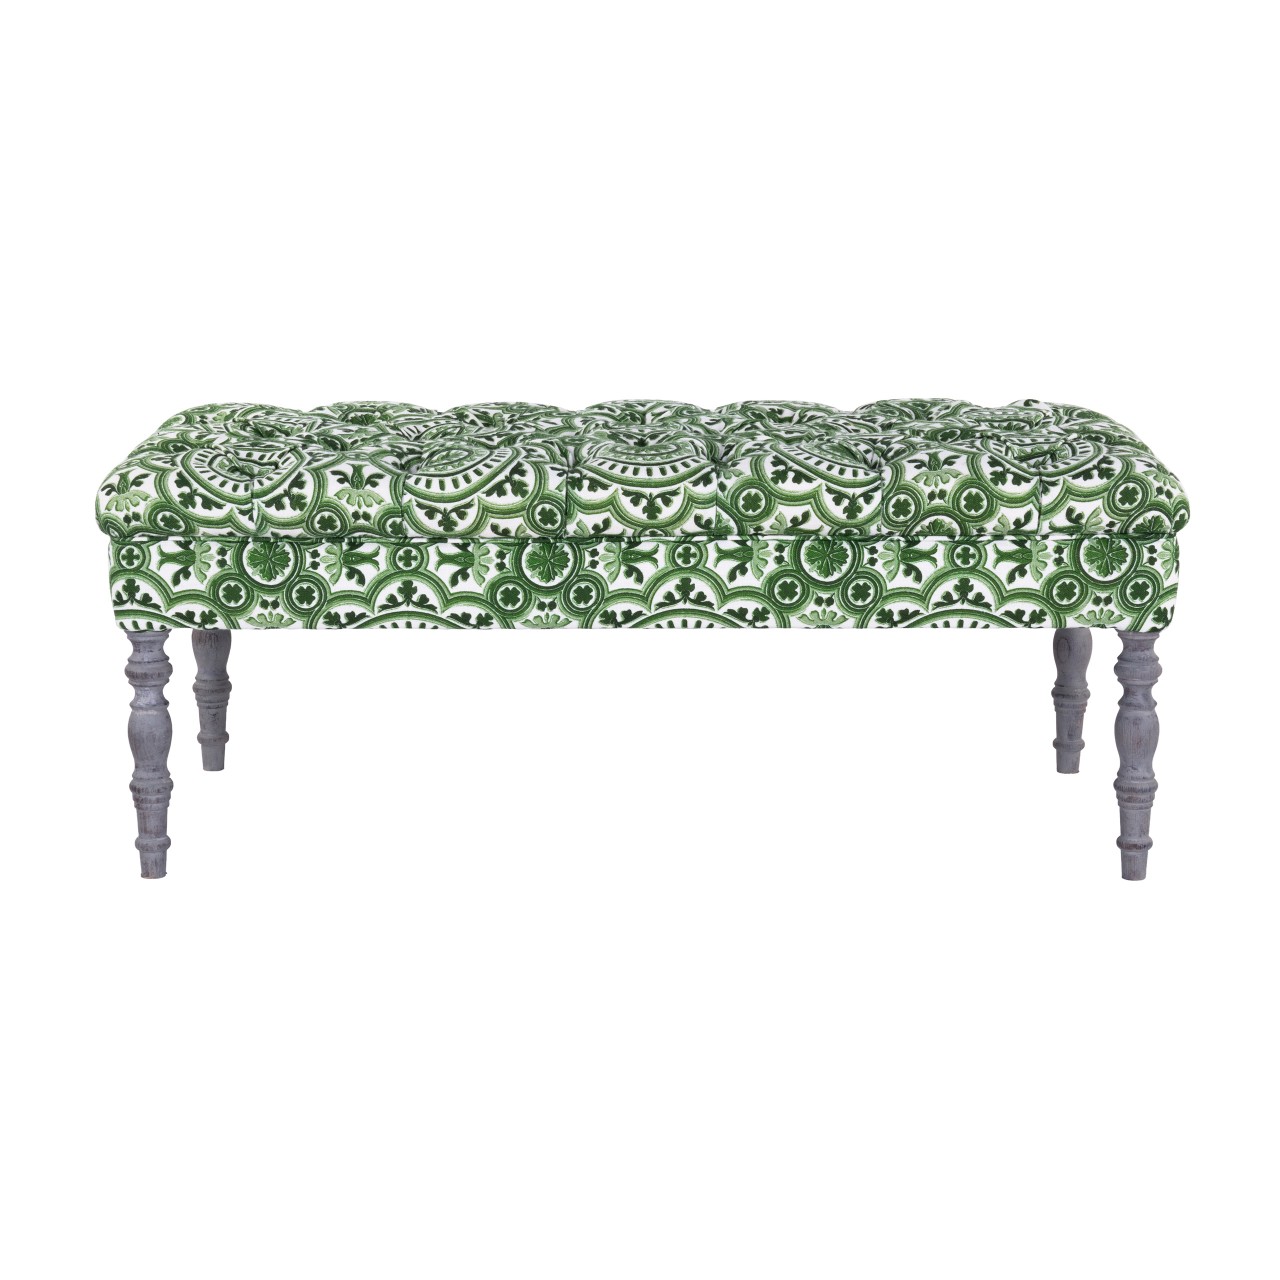 EDWARD Ottoman Tufted Bench - THE MANOR Linen